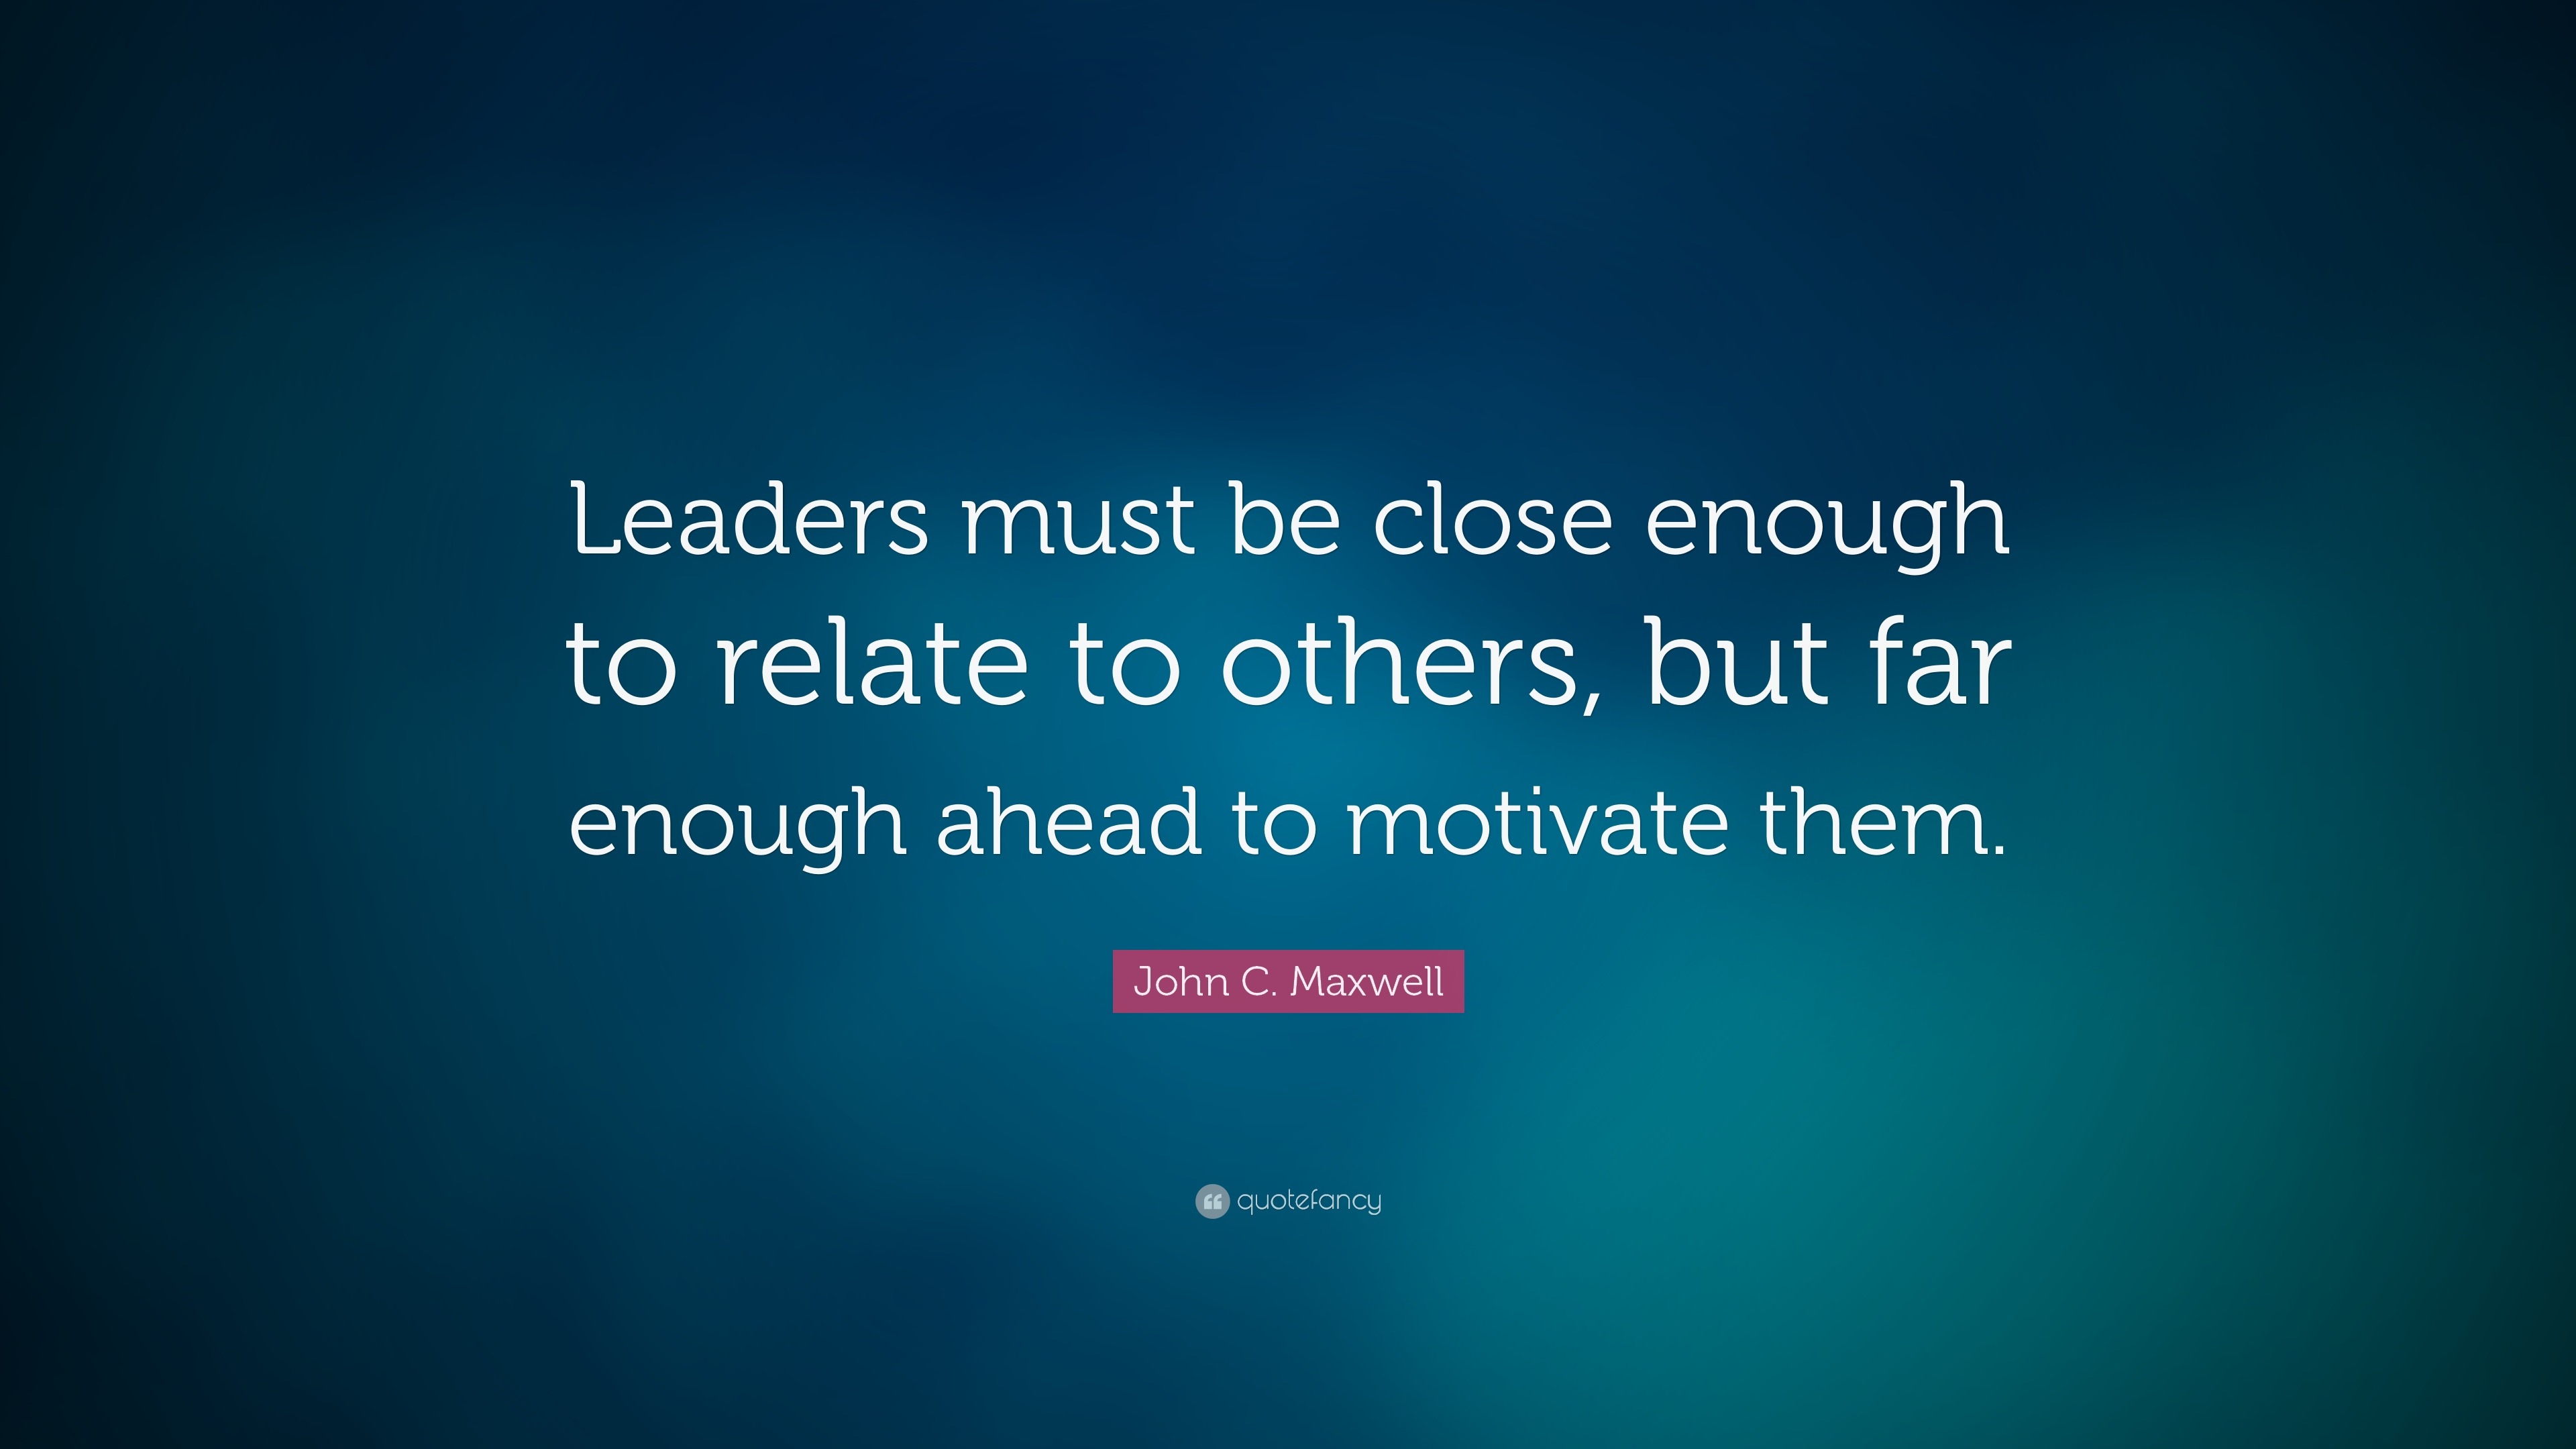 John C. Maxwell Quote: “Leaders must be close enough to relate to ...